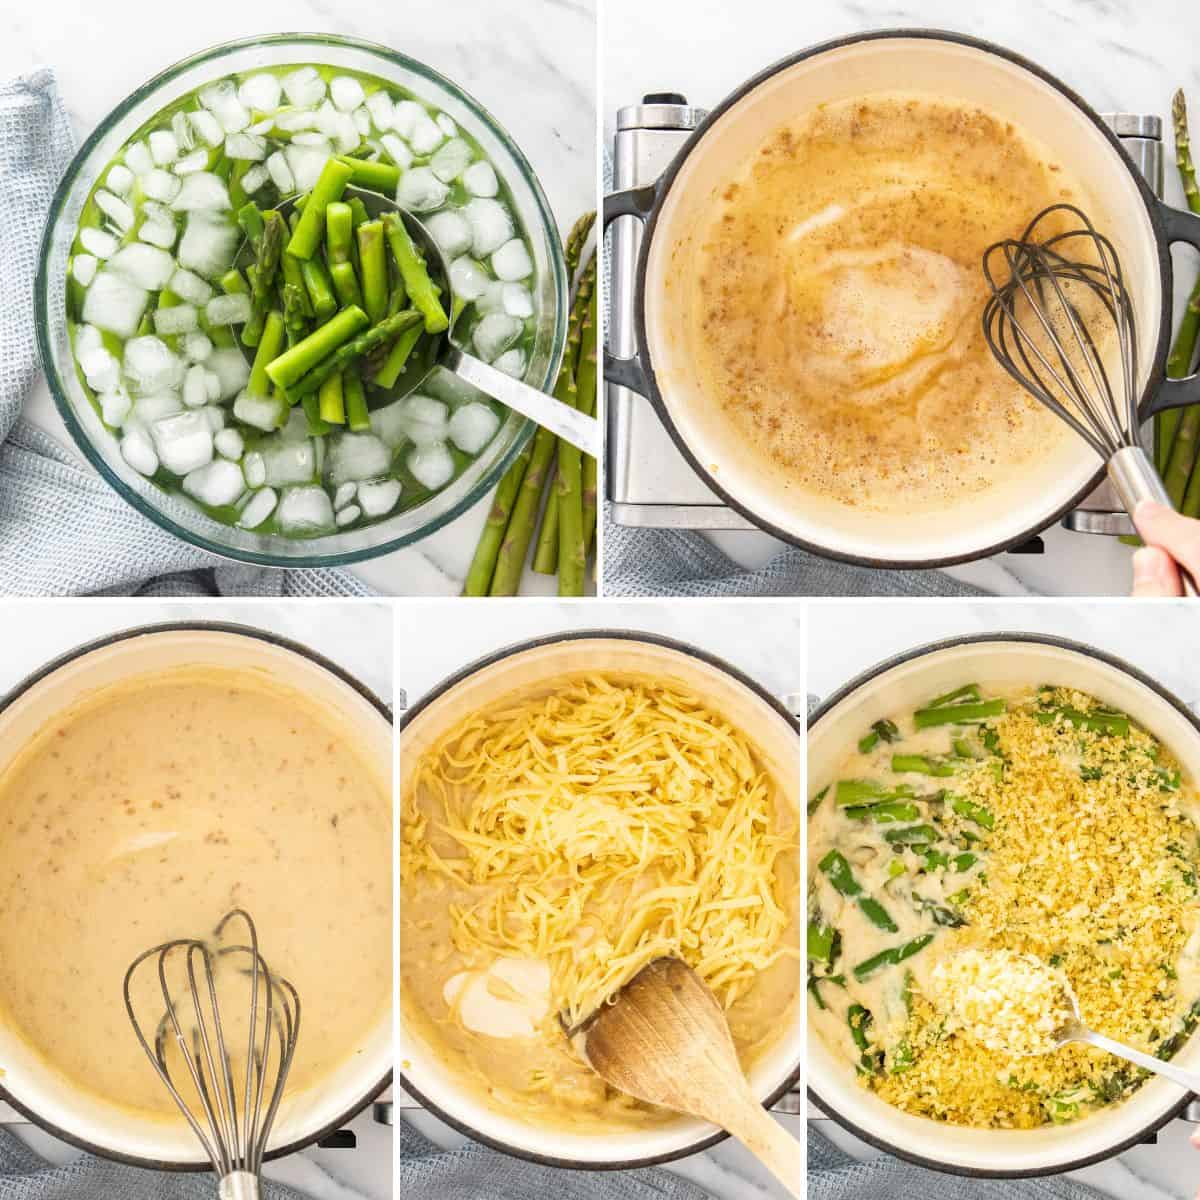 5 photos showing the process of making asparagus casserole.